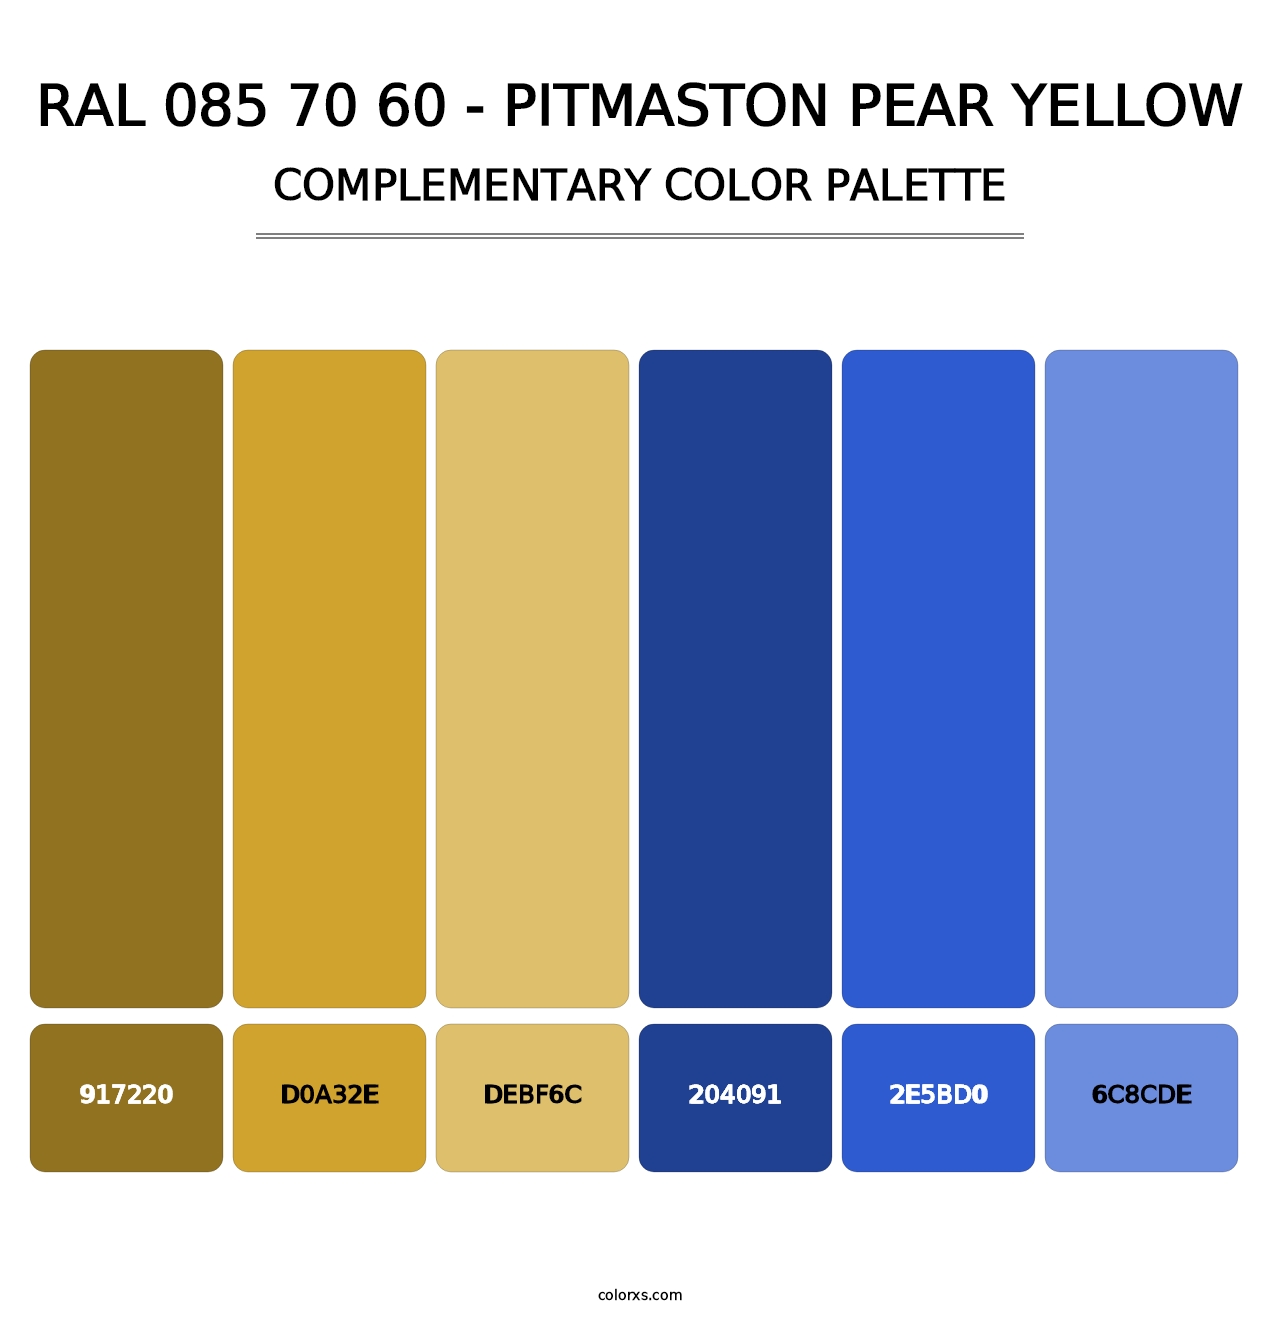 RAL 085 70 60 - Pitmaston Pear Yellow - Complementary Color Palette